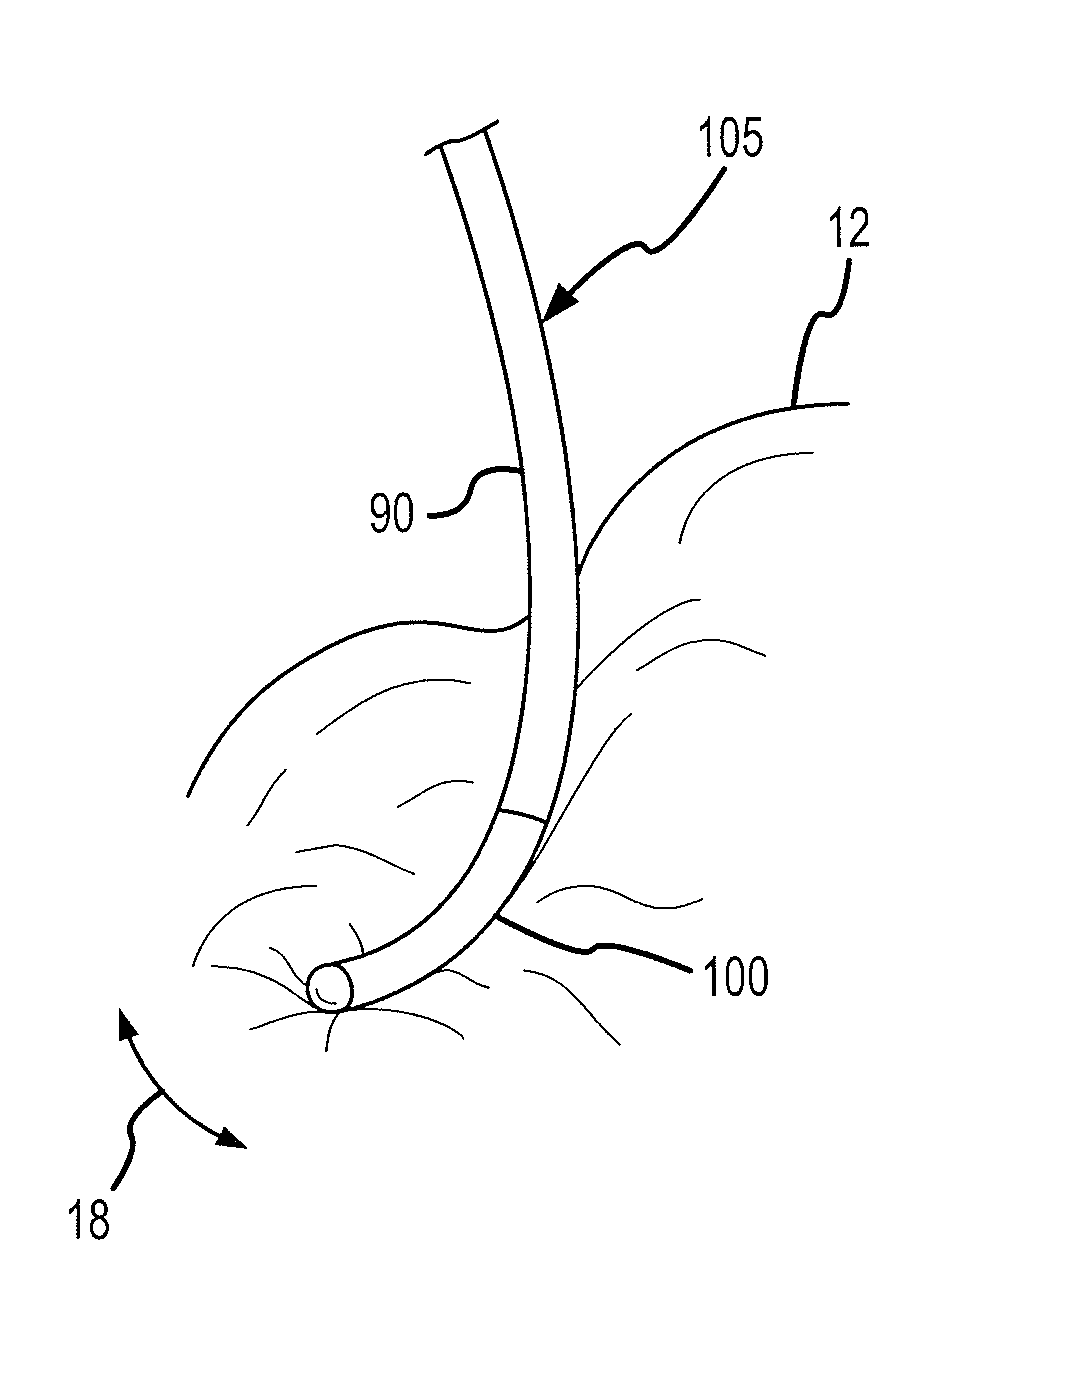 Ablation electrodes with capacitive sensors for resolving magnitude and direction of forces imparted to a distal portion of a cardiac catheter